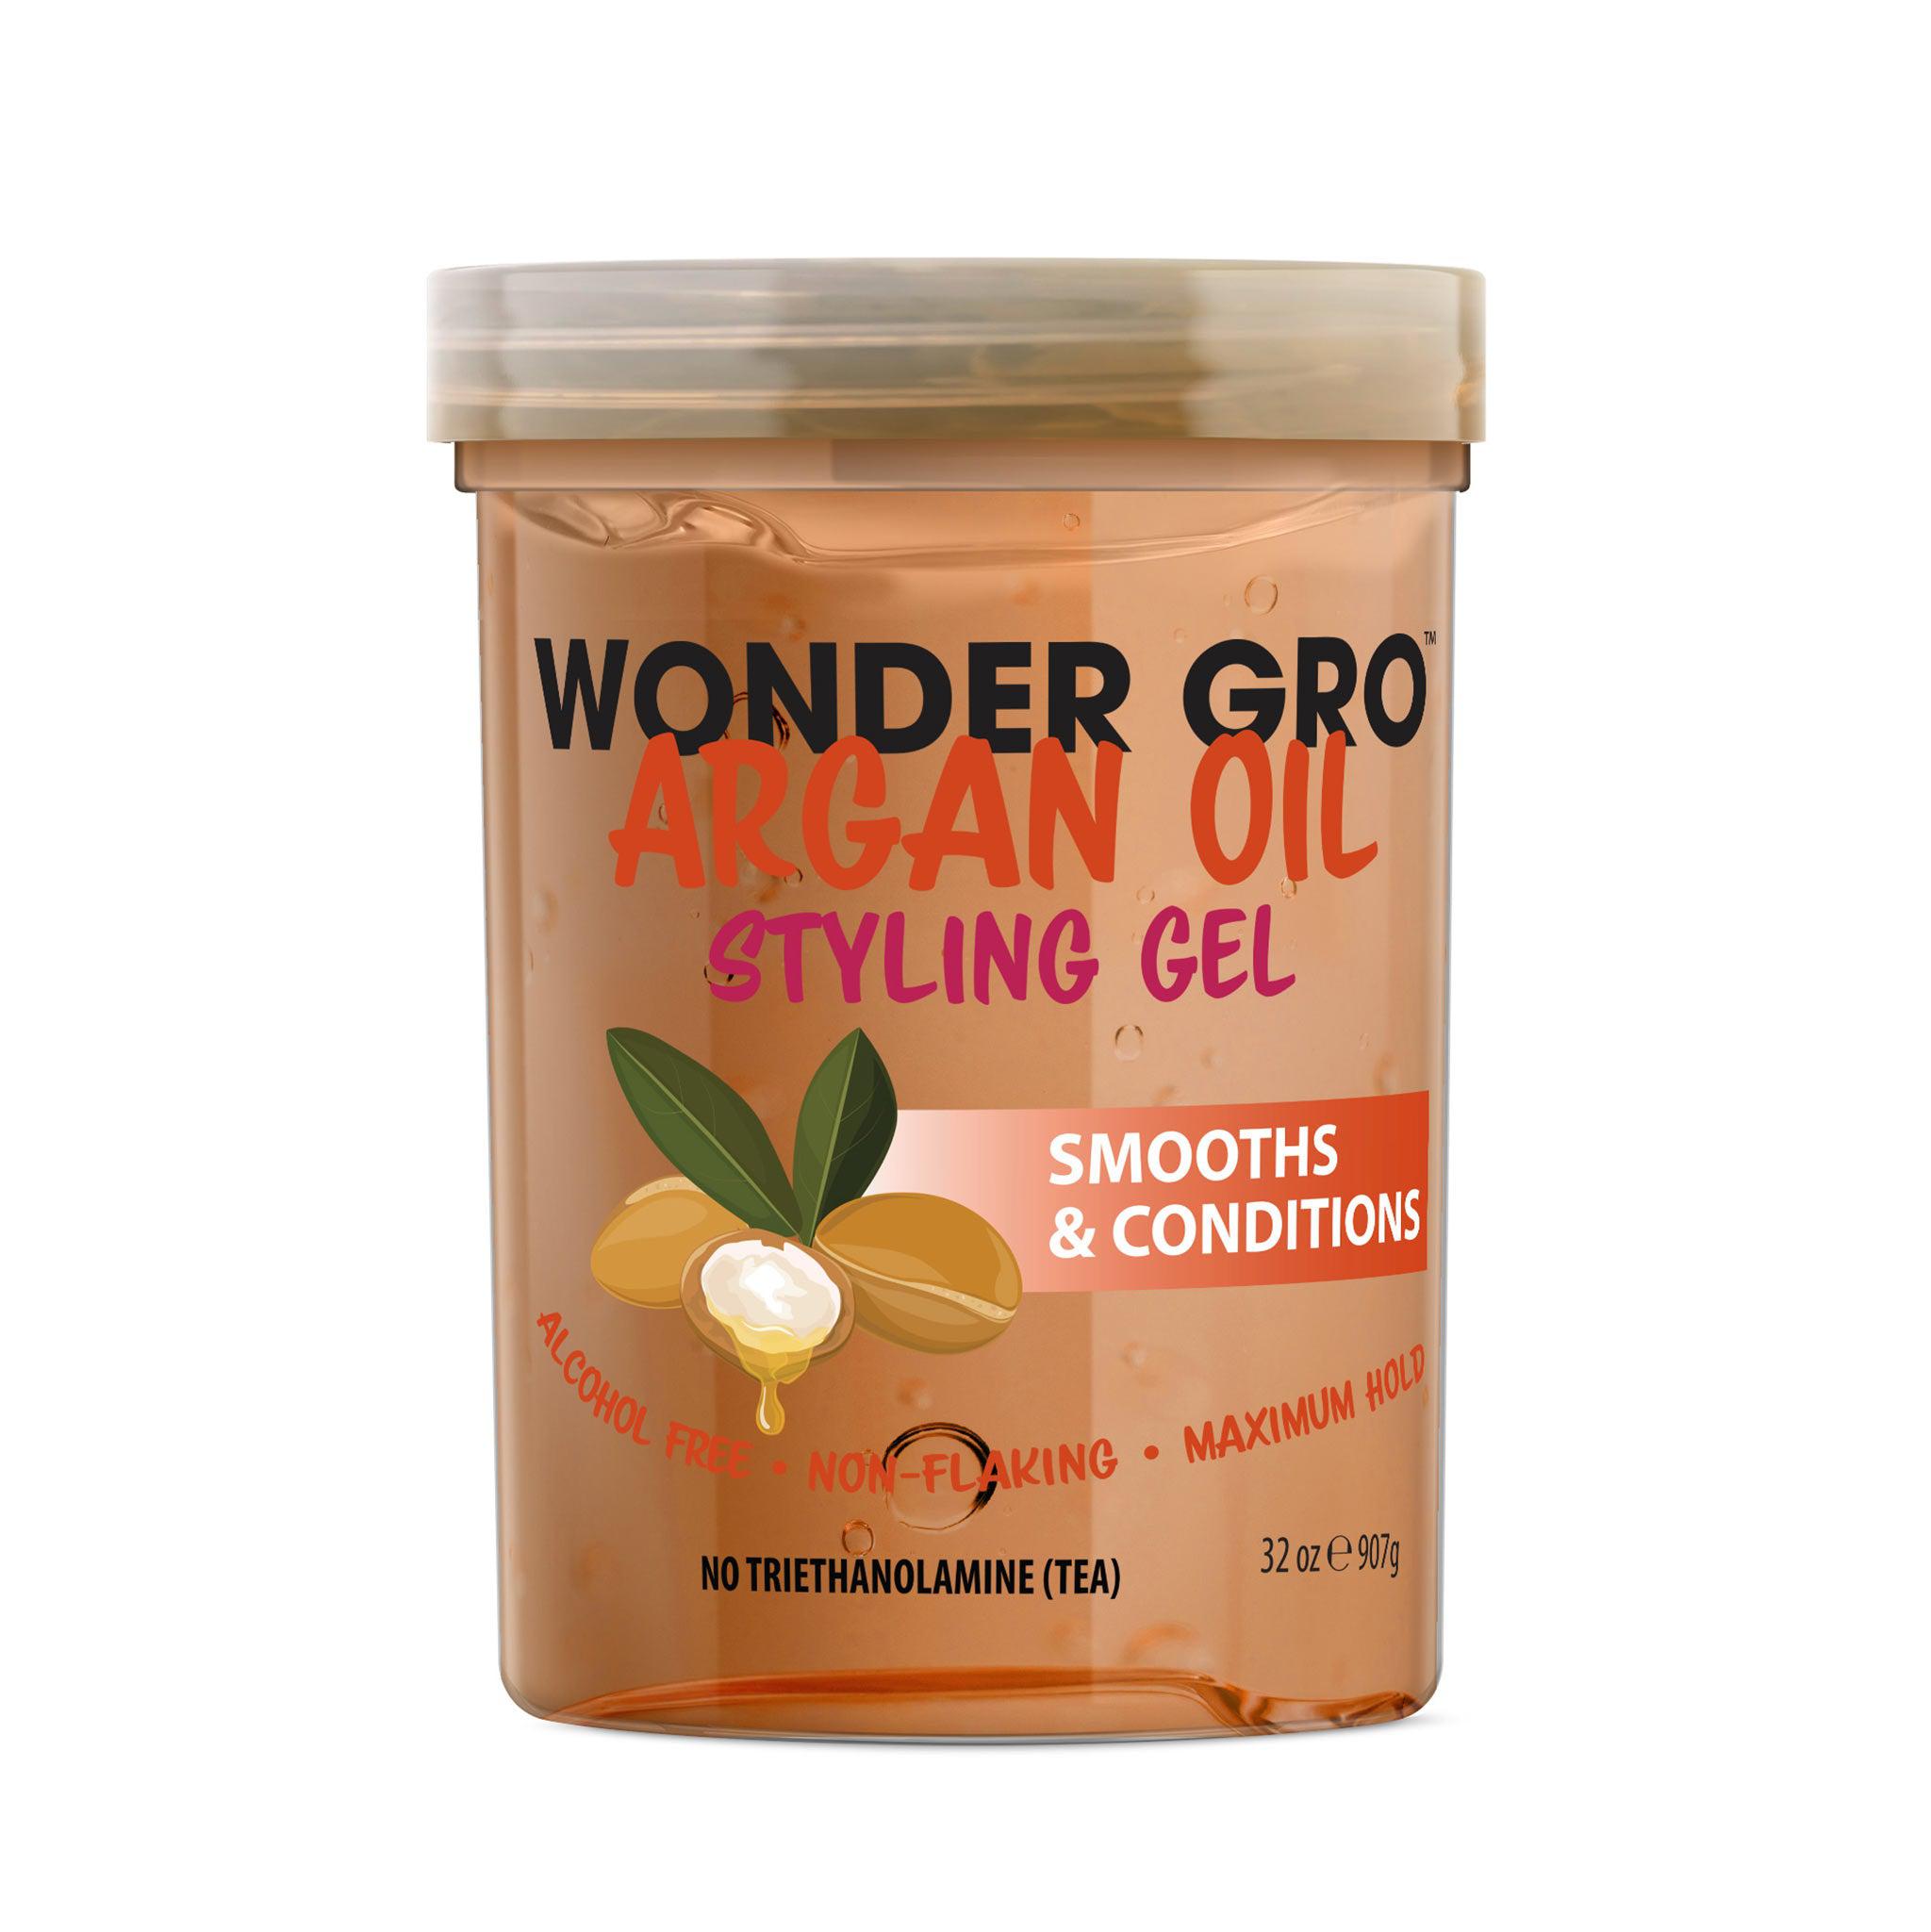 Wonder Gro Hair Products: Oils for Healthy Hair